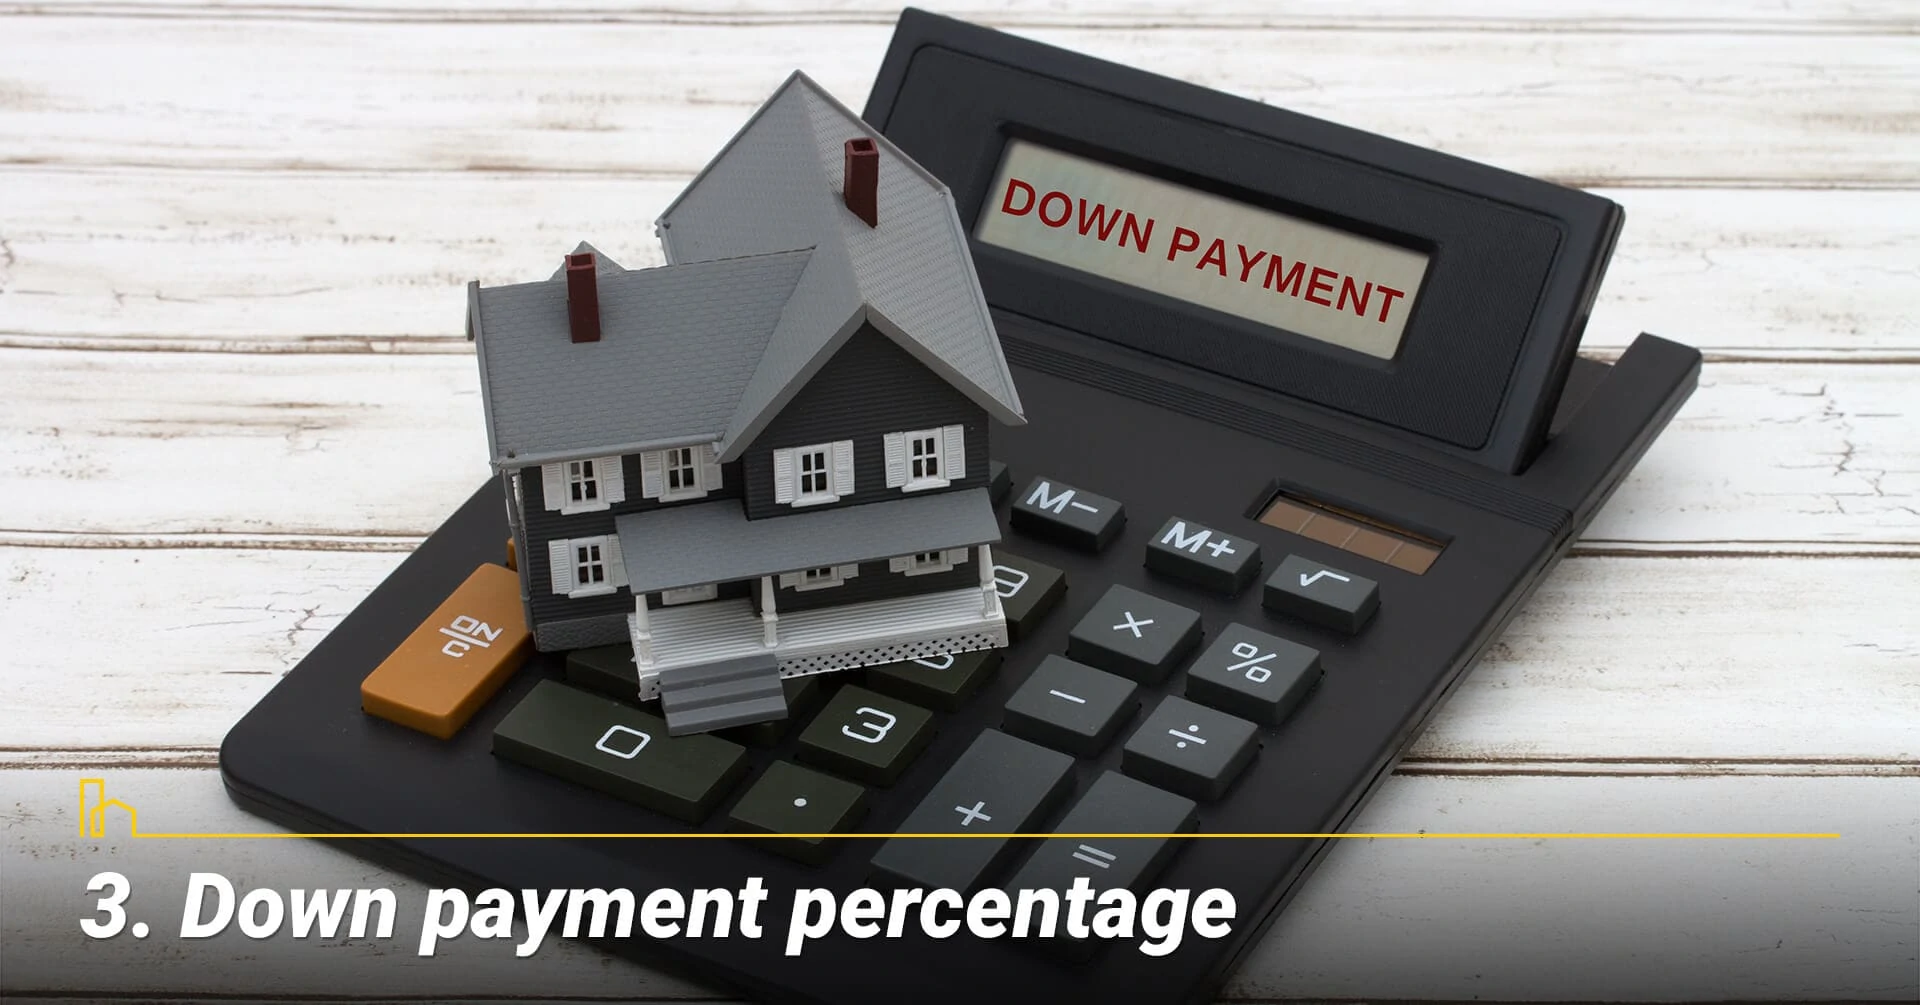 Down payment percentage, amount of down payment